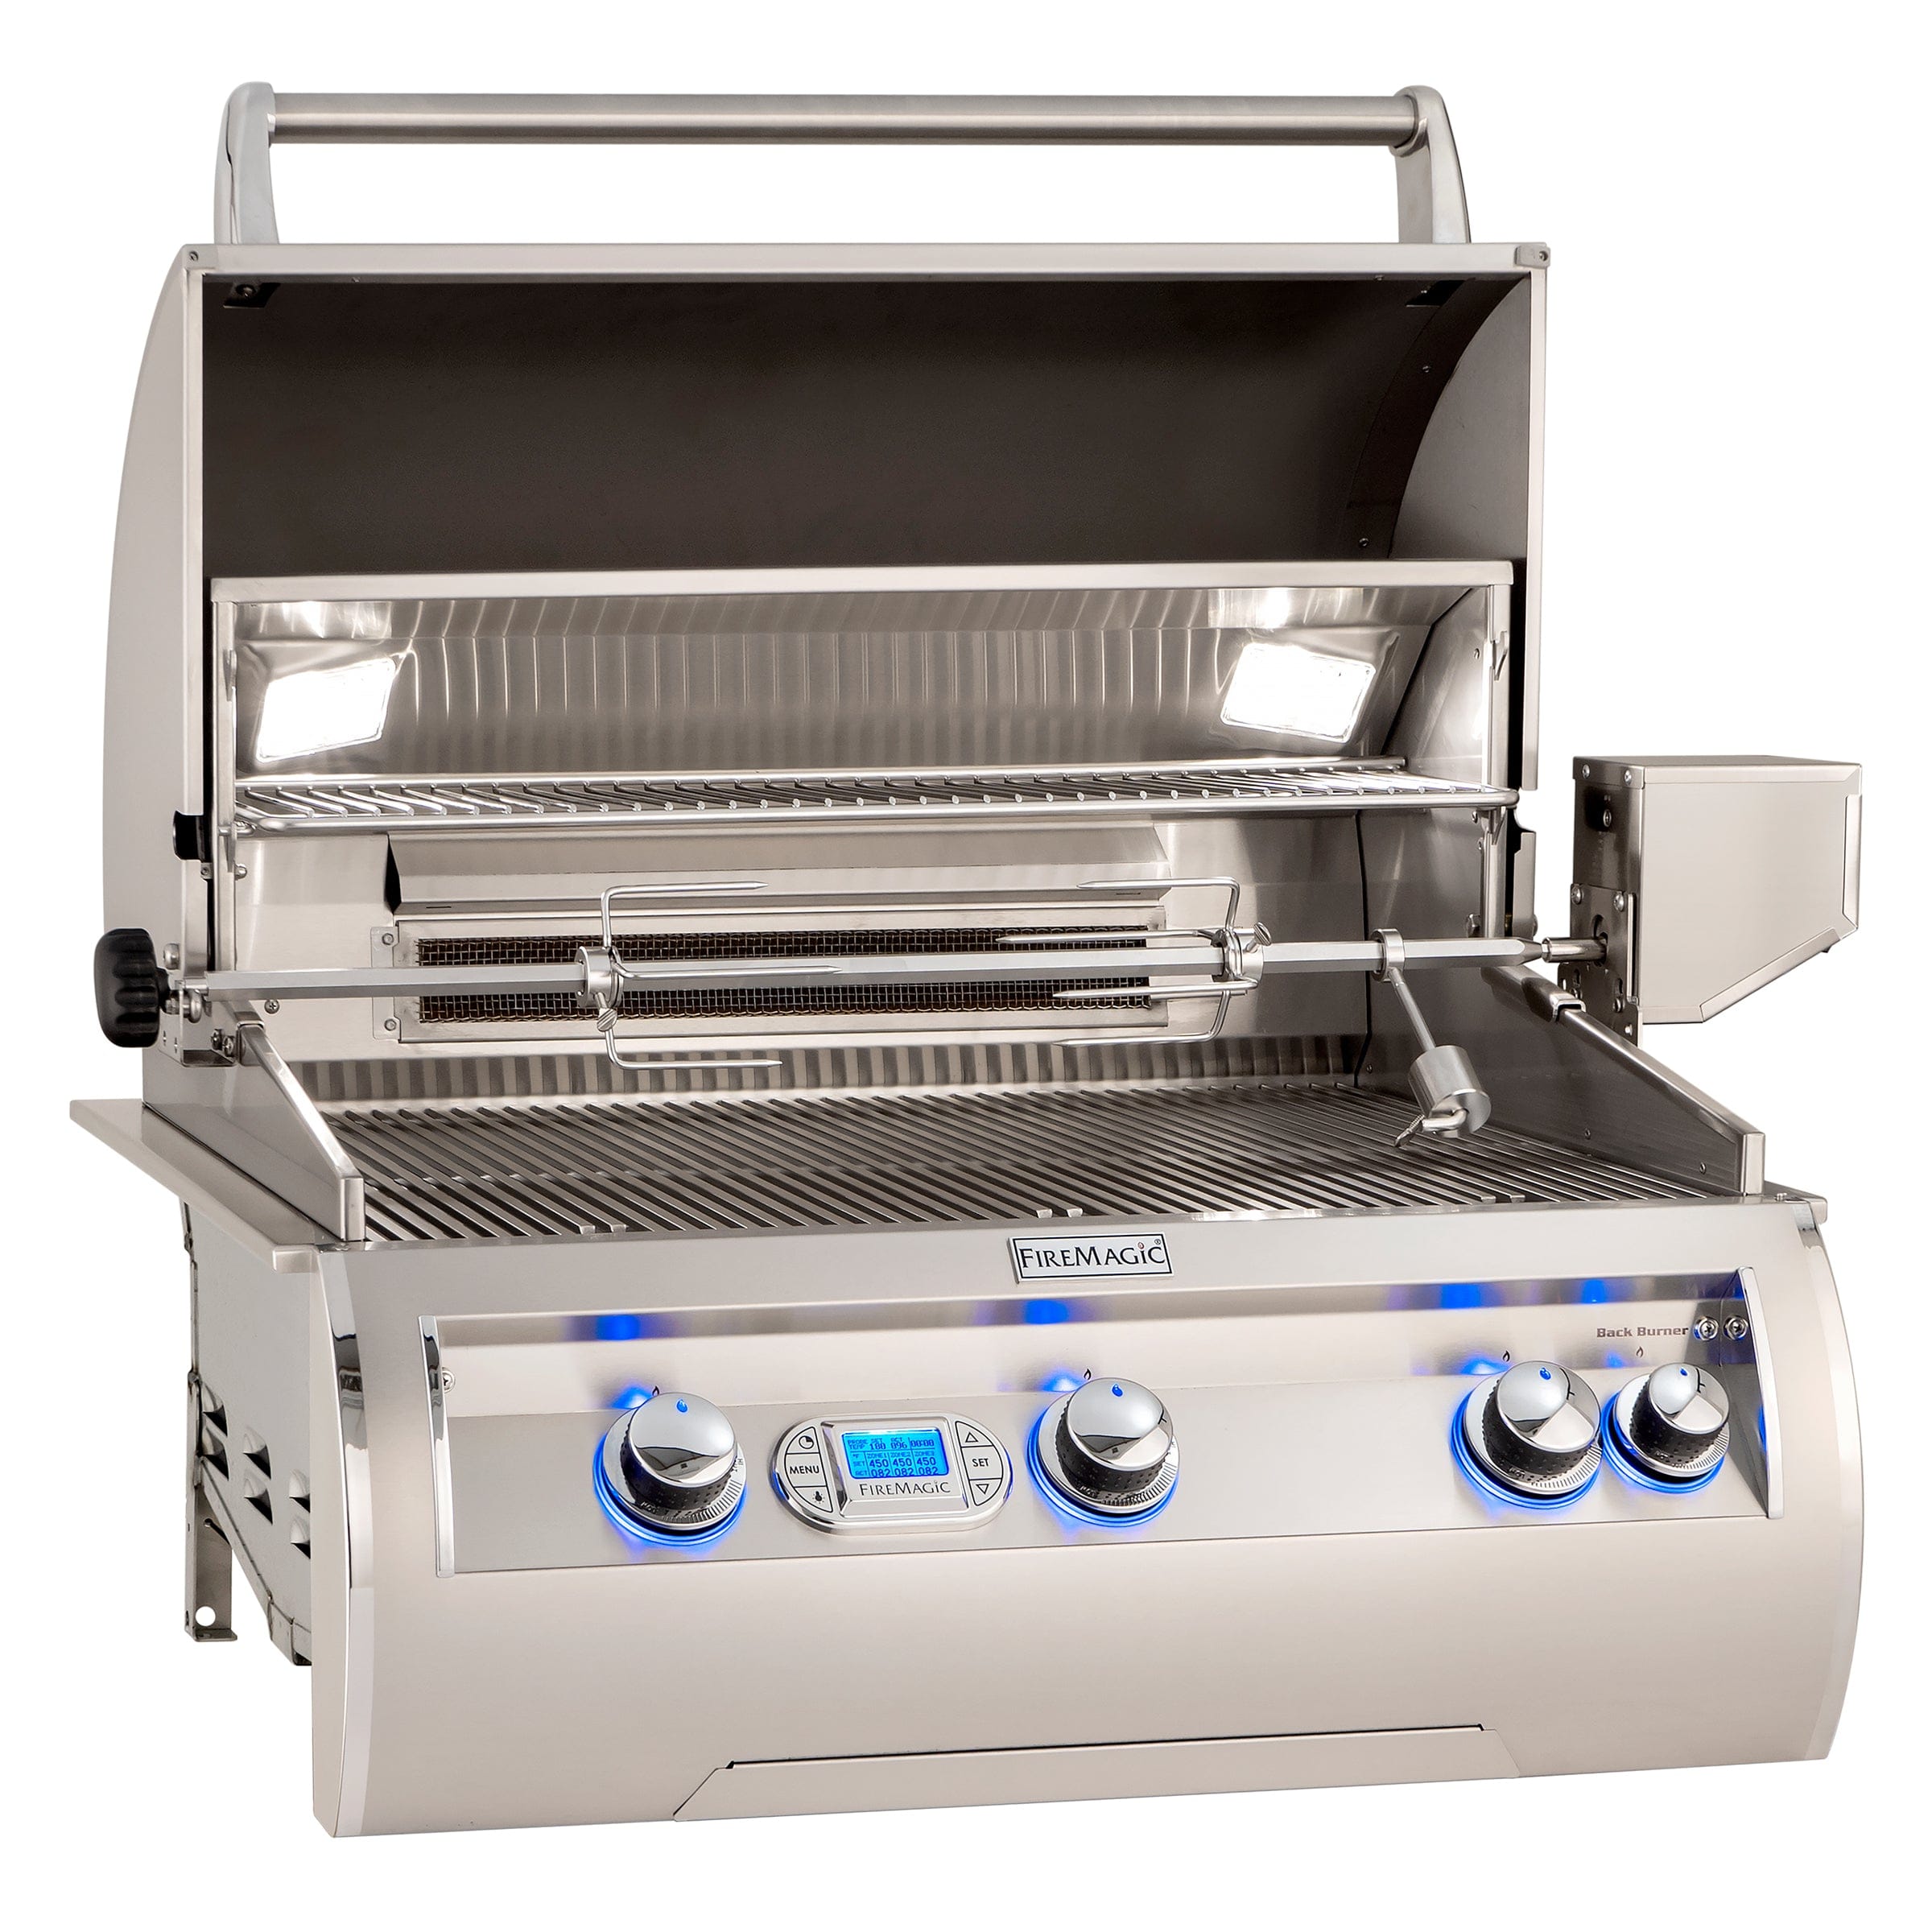 Fire Magic Built-In Grill With Window / Natural Gas Fire Magic - Echelon E660i Built-In Grill With Digital Thermometer - Natural Gas / Liquid Propane 2